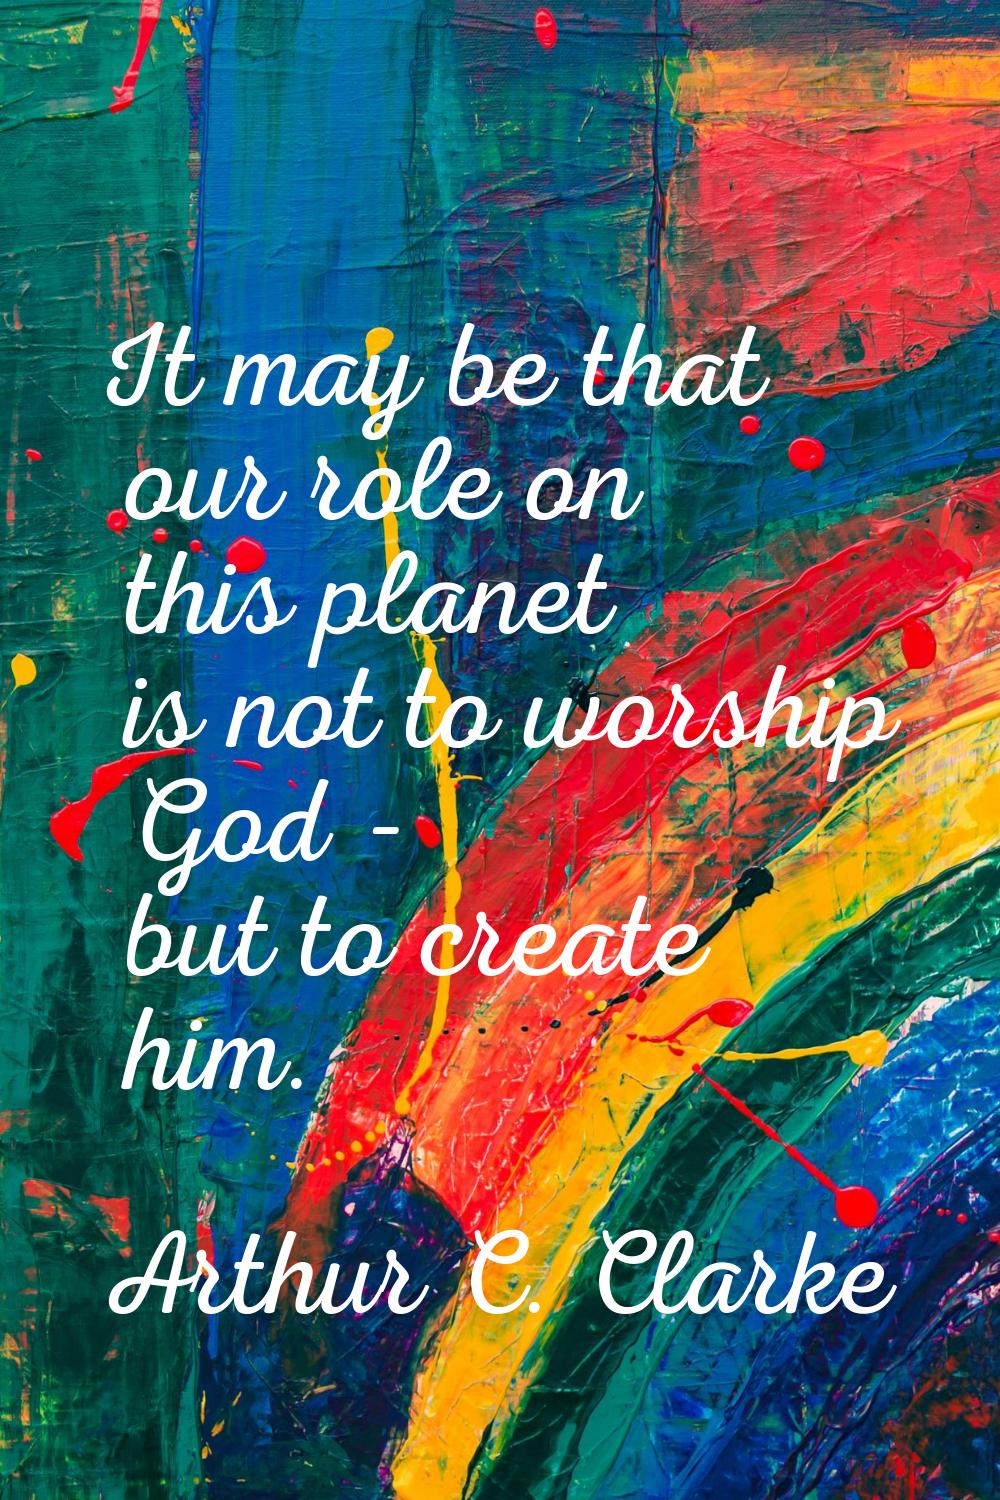 It may be that our role on this planet is not to worship God - but to create him.